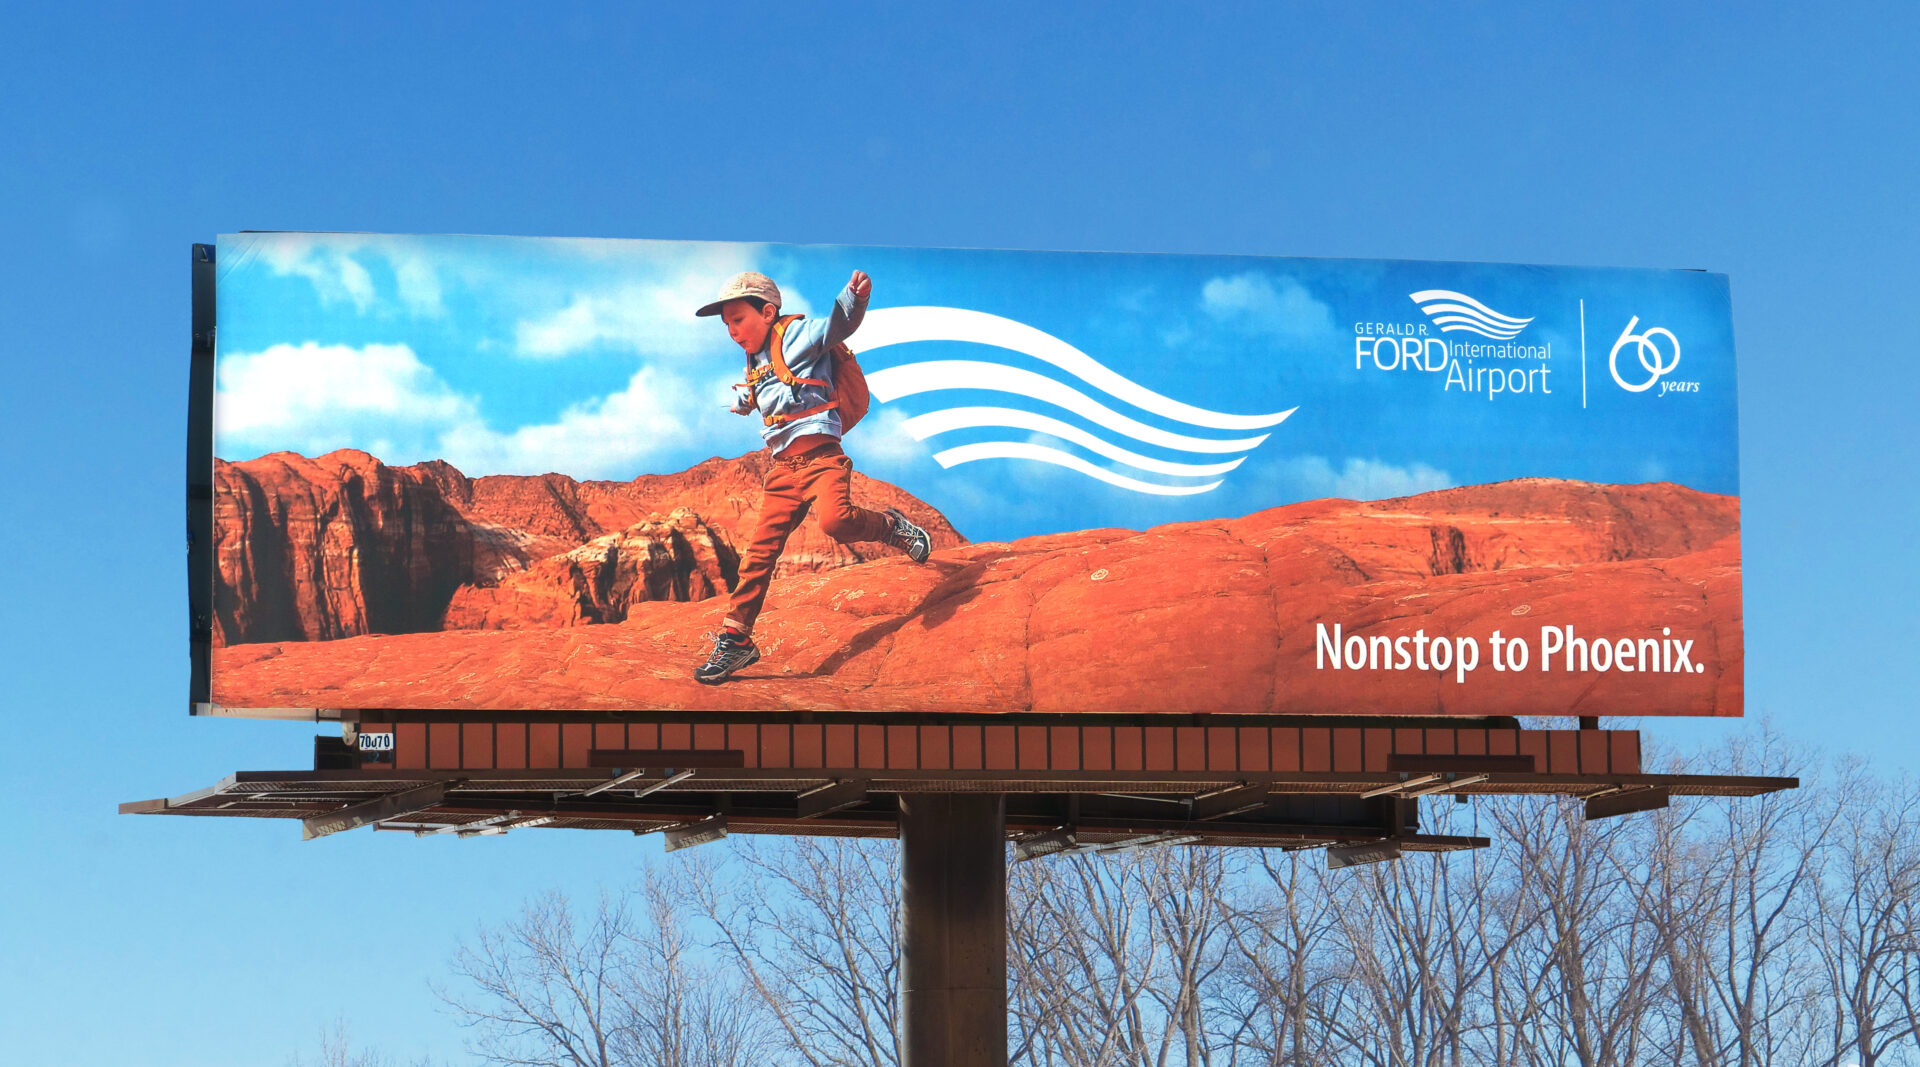 Out of home brand campaign for Gerald R. Ford International Airport. Nonstop to Phoenix